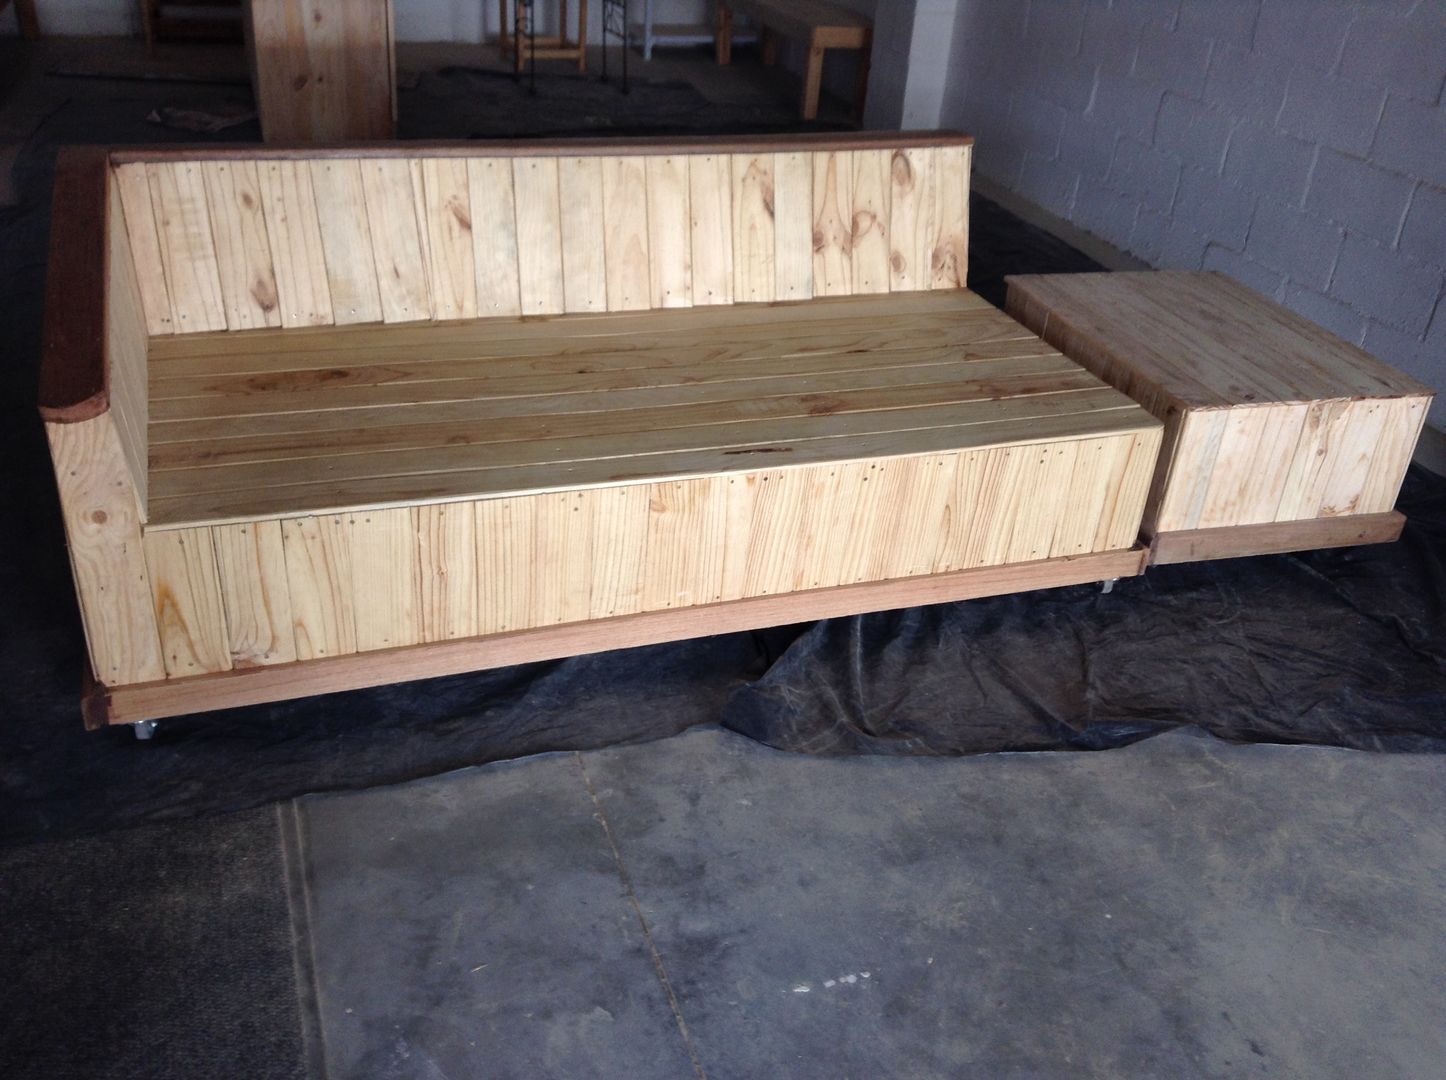 Four Seater Daybed/Couch, Pallet Furniture Cape Town Pallet Furniture Cape Town ラスティックデザインの テラス 家具